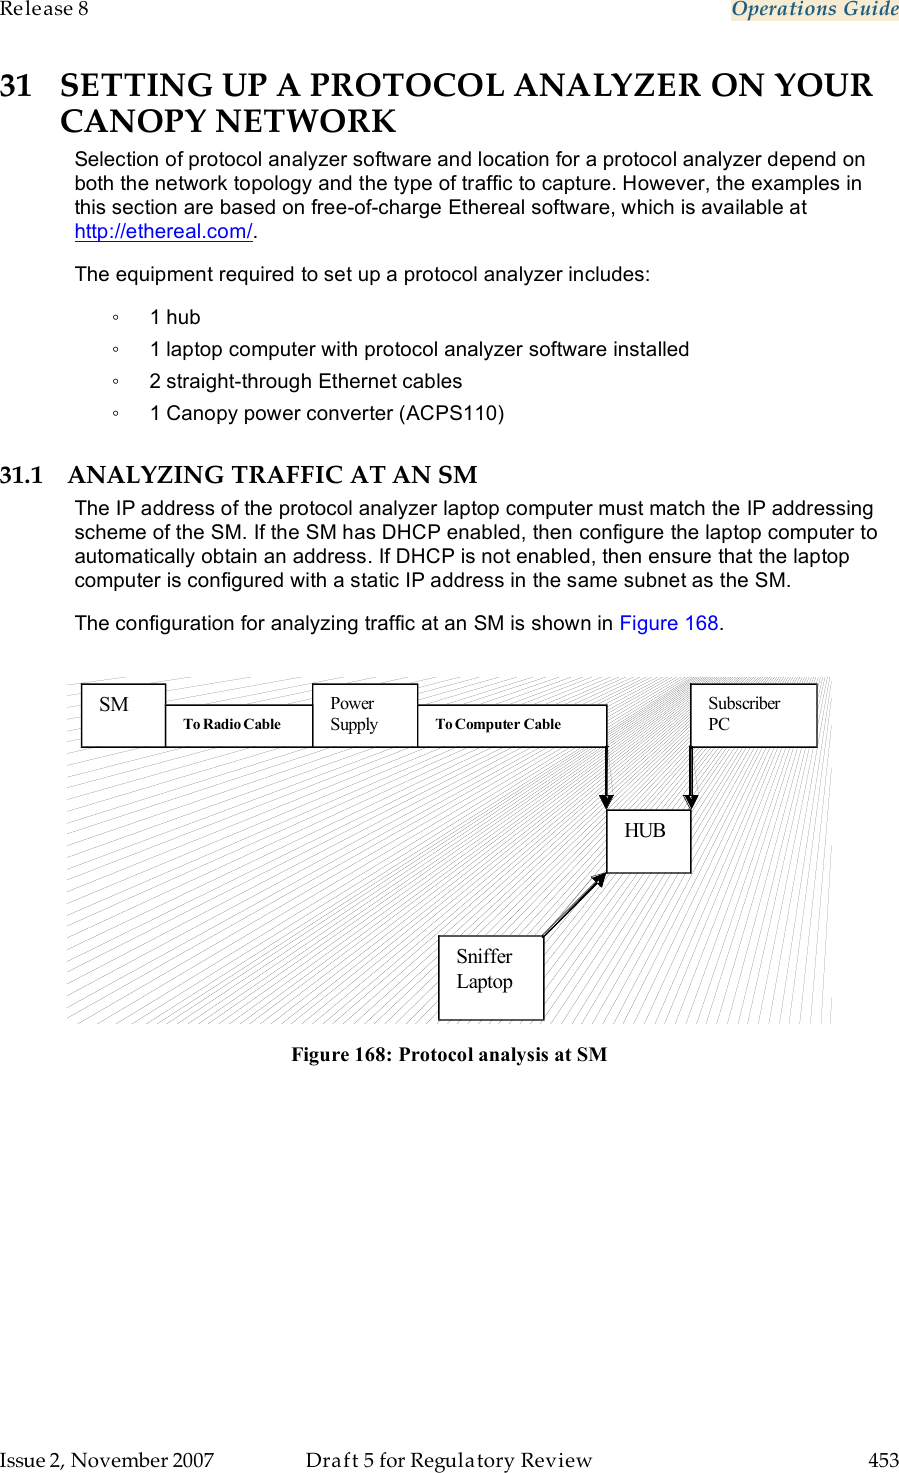 Release 8    Operations Guide   Issue 2, November 2007  Draft 5 for Regulatory Review  453     31 SETTING UP A PROTOCOL ANALYZER ON YOUR CANOPY NETWORK Selection of protocol analyzer software and location for a protocol analyzer depend on both the network topology and the type of traffic to capture. However, the examples in this section are based on free-of-charge Ethereal software, which is available at http://ethereal.com/. The equipment required to set up a protocol analyzer includes: ◦  1 hub ◦  1 laptop computer with protocol analyzer software installed ◦  2 straight-through Ethernet cables ◦  1 Canopy power converter (ACPS110) 31.1 ANALYZING TRAFFIC AT AN SM The IP address of the protocol analyzer laptop computer must match the IP addressing scheme of the SM. If the SM has DHCP enabled, then configure the laptop computer to automatically obtain an address. If DHCP is not enabled, then ensure that the laptop computer is configured with a static IP address in the same subnet as the SM. The configuration for analyzing traffic at an SM is shown in Figure 168.   Subscriber PC Power Supply  SM HUB Sniffer Laptop  To Computer Cable  To Radio Cable   Figure 168: Protocol analysis at SM 